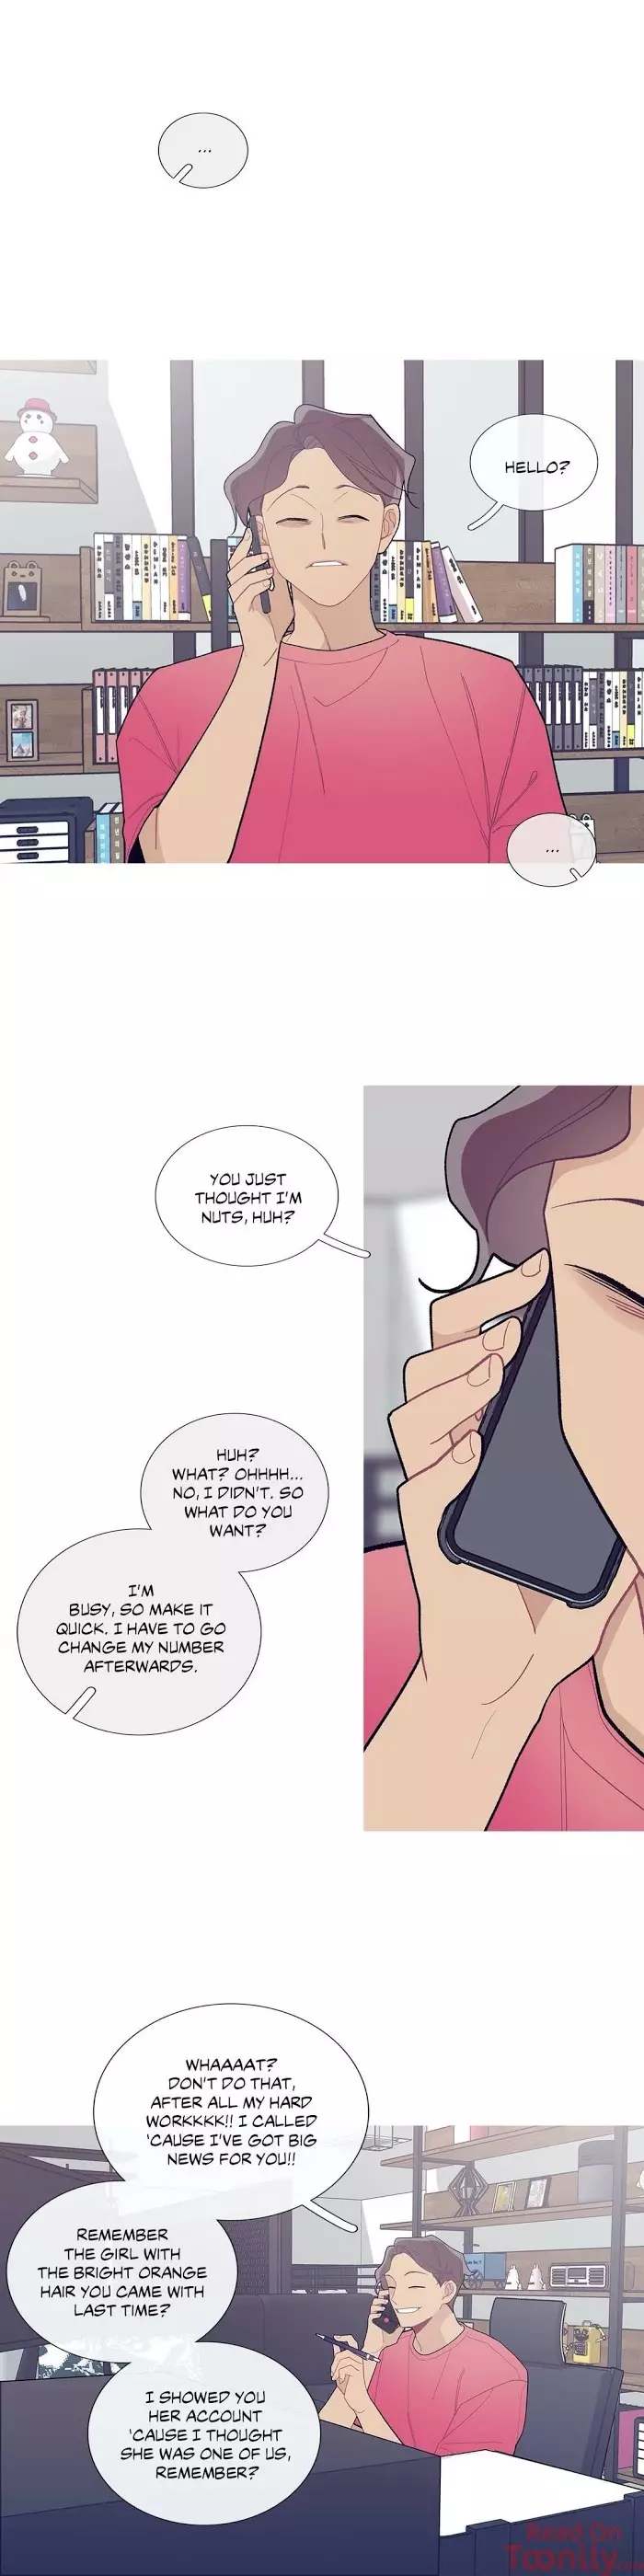 What's Going On? - 81 page 19-0359e4a0